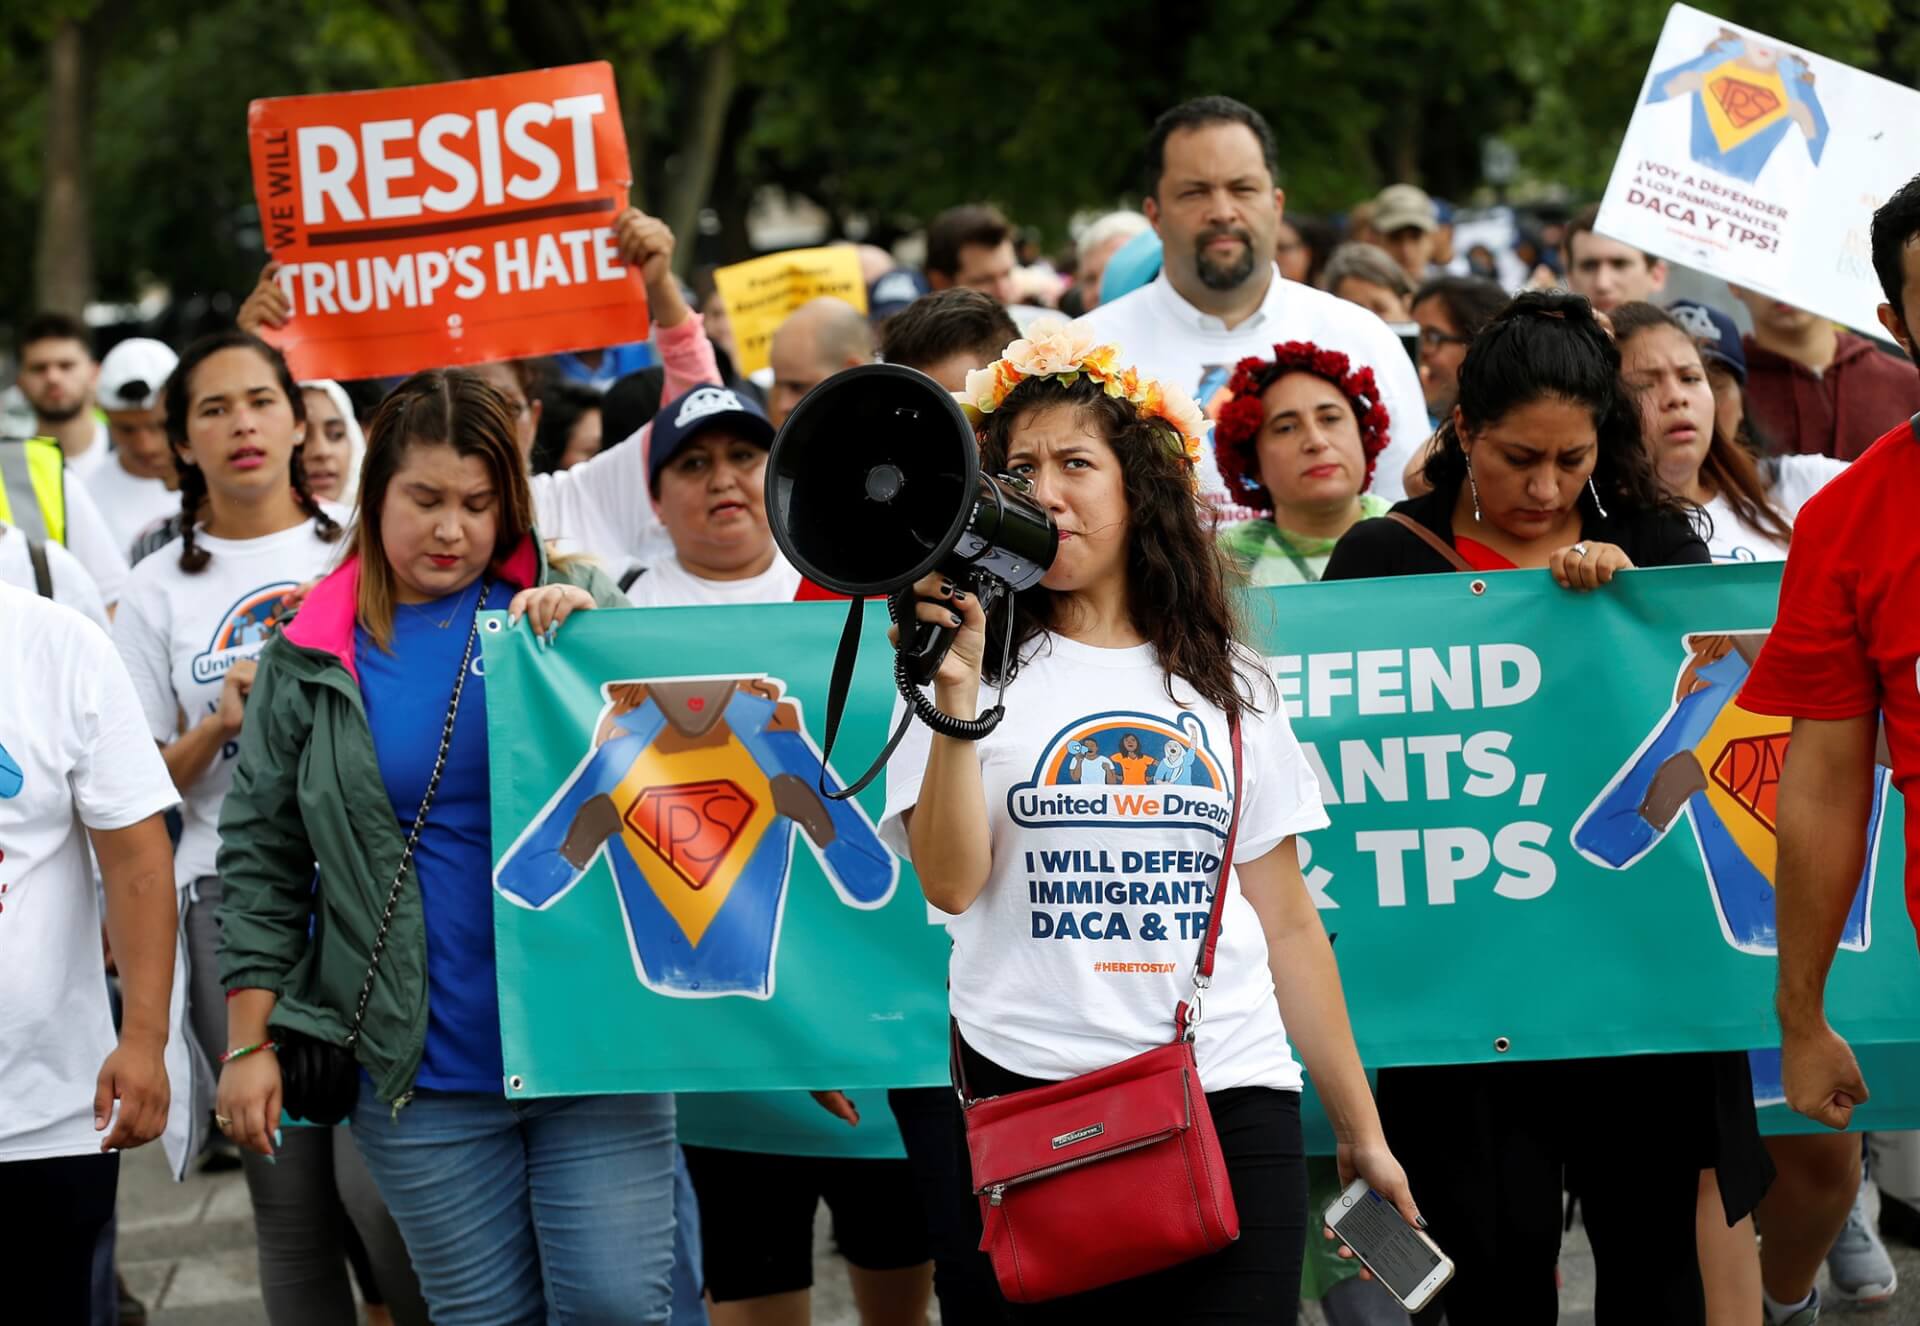 US Court Allows Trump Administration to Rescind TPS Protections for 300,000 Immigrants